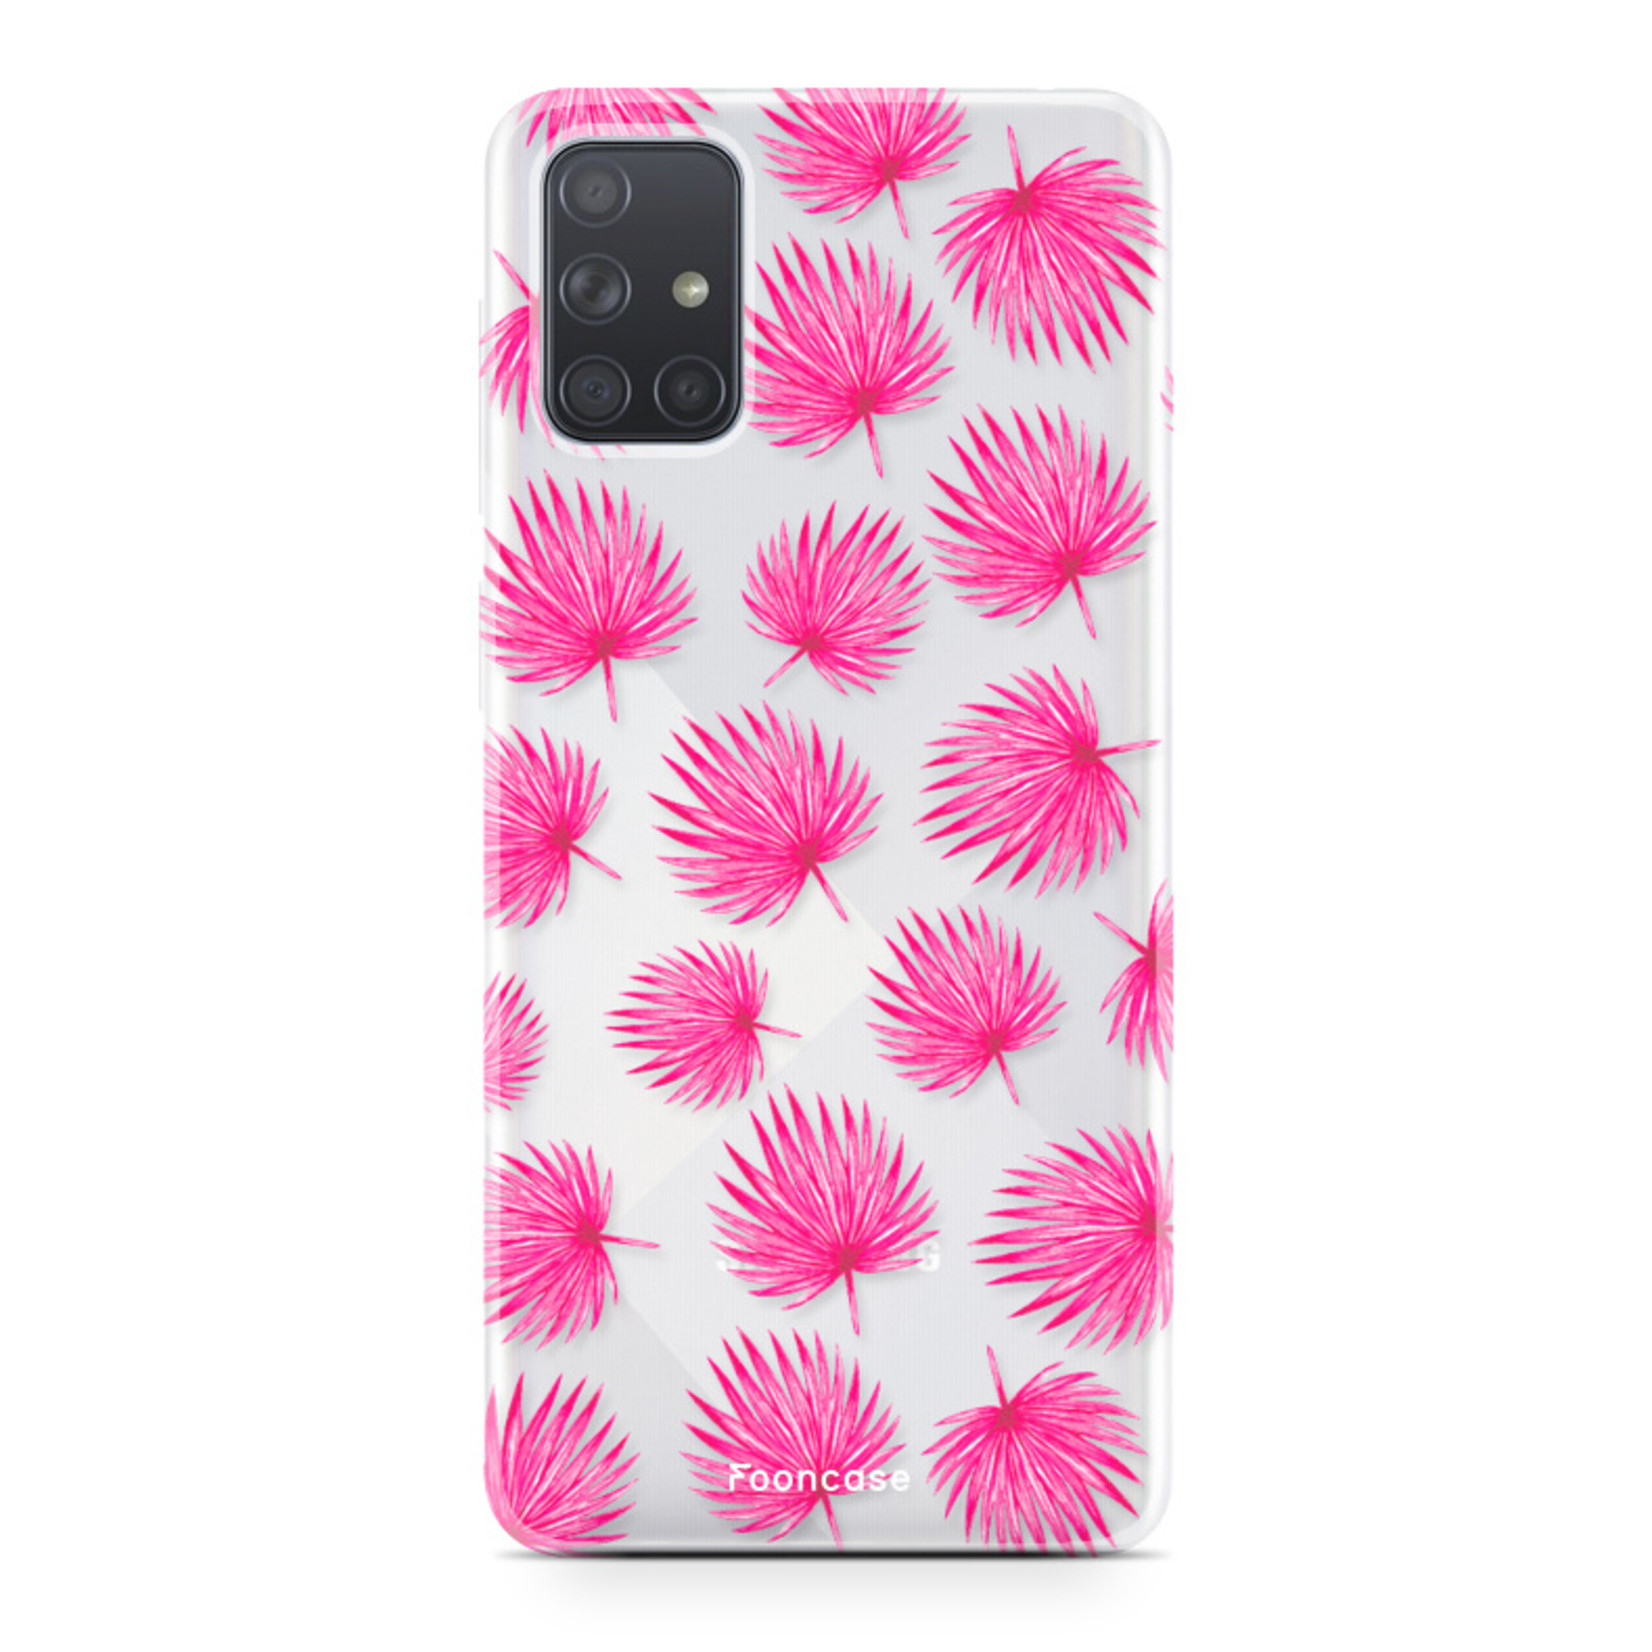 Samsung Galaxy A51 Case - Pink leaves